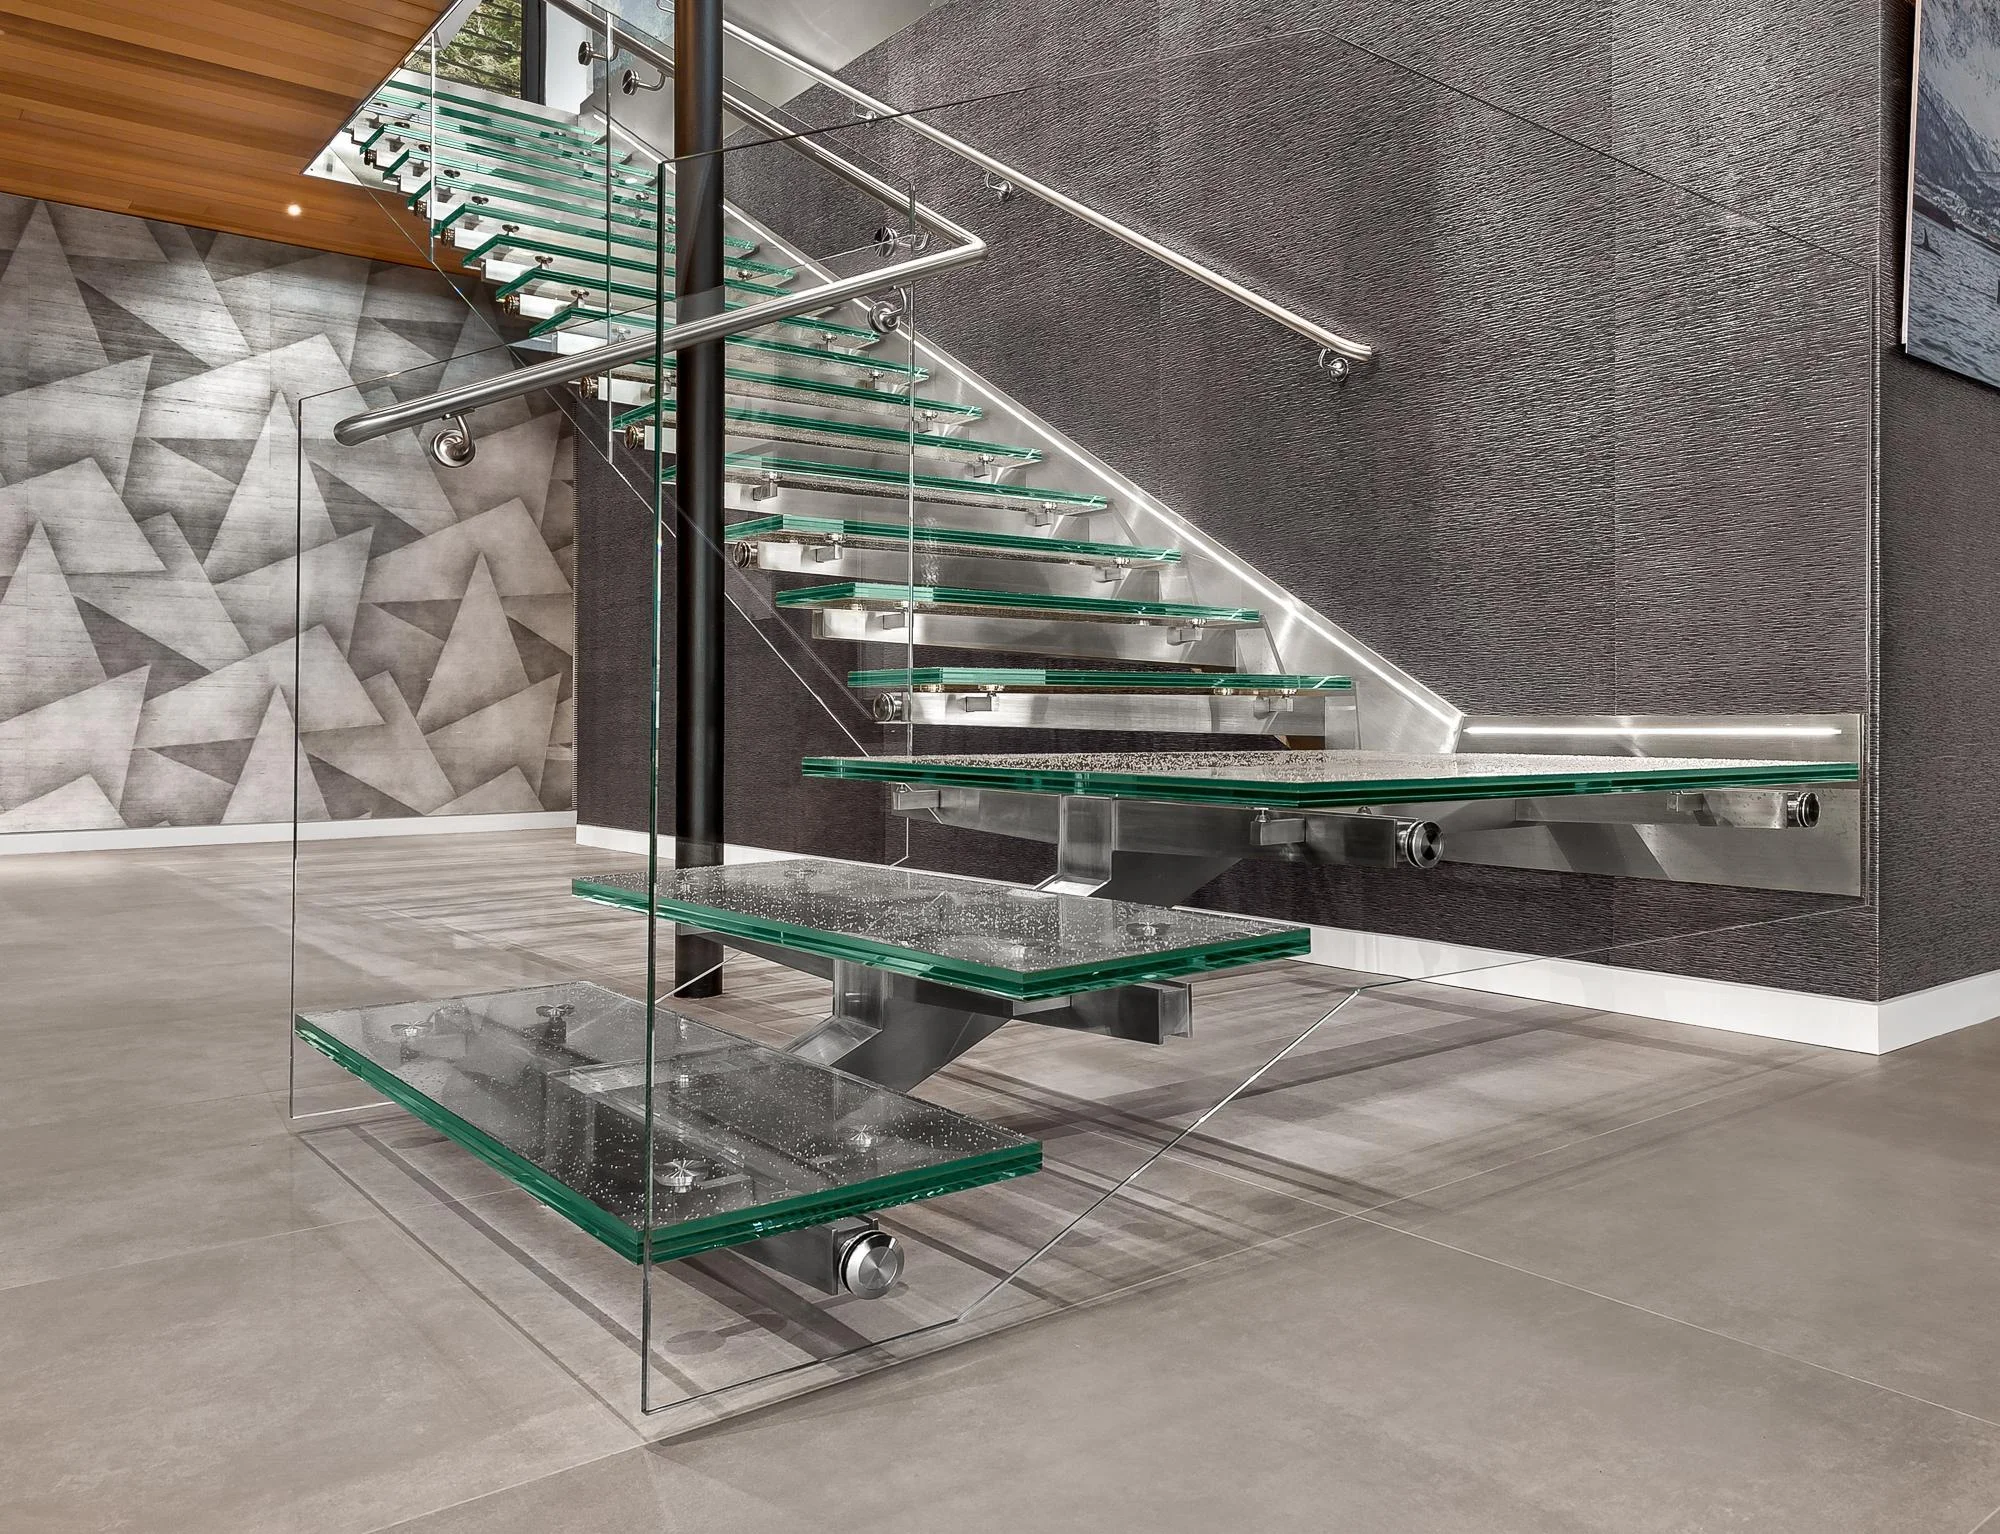 Inspiring Staircase Tiles Types & Design for a Stylish Interior